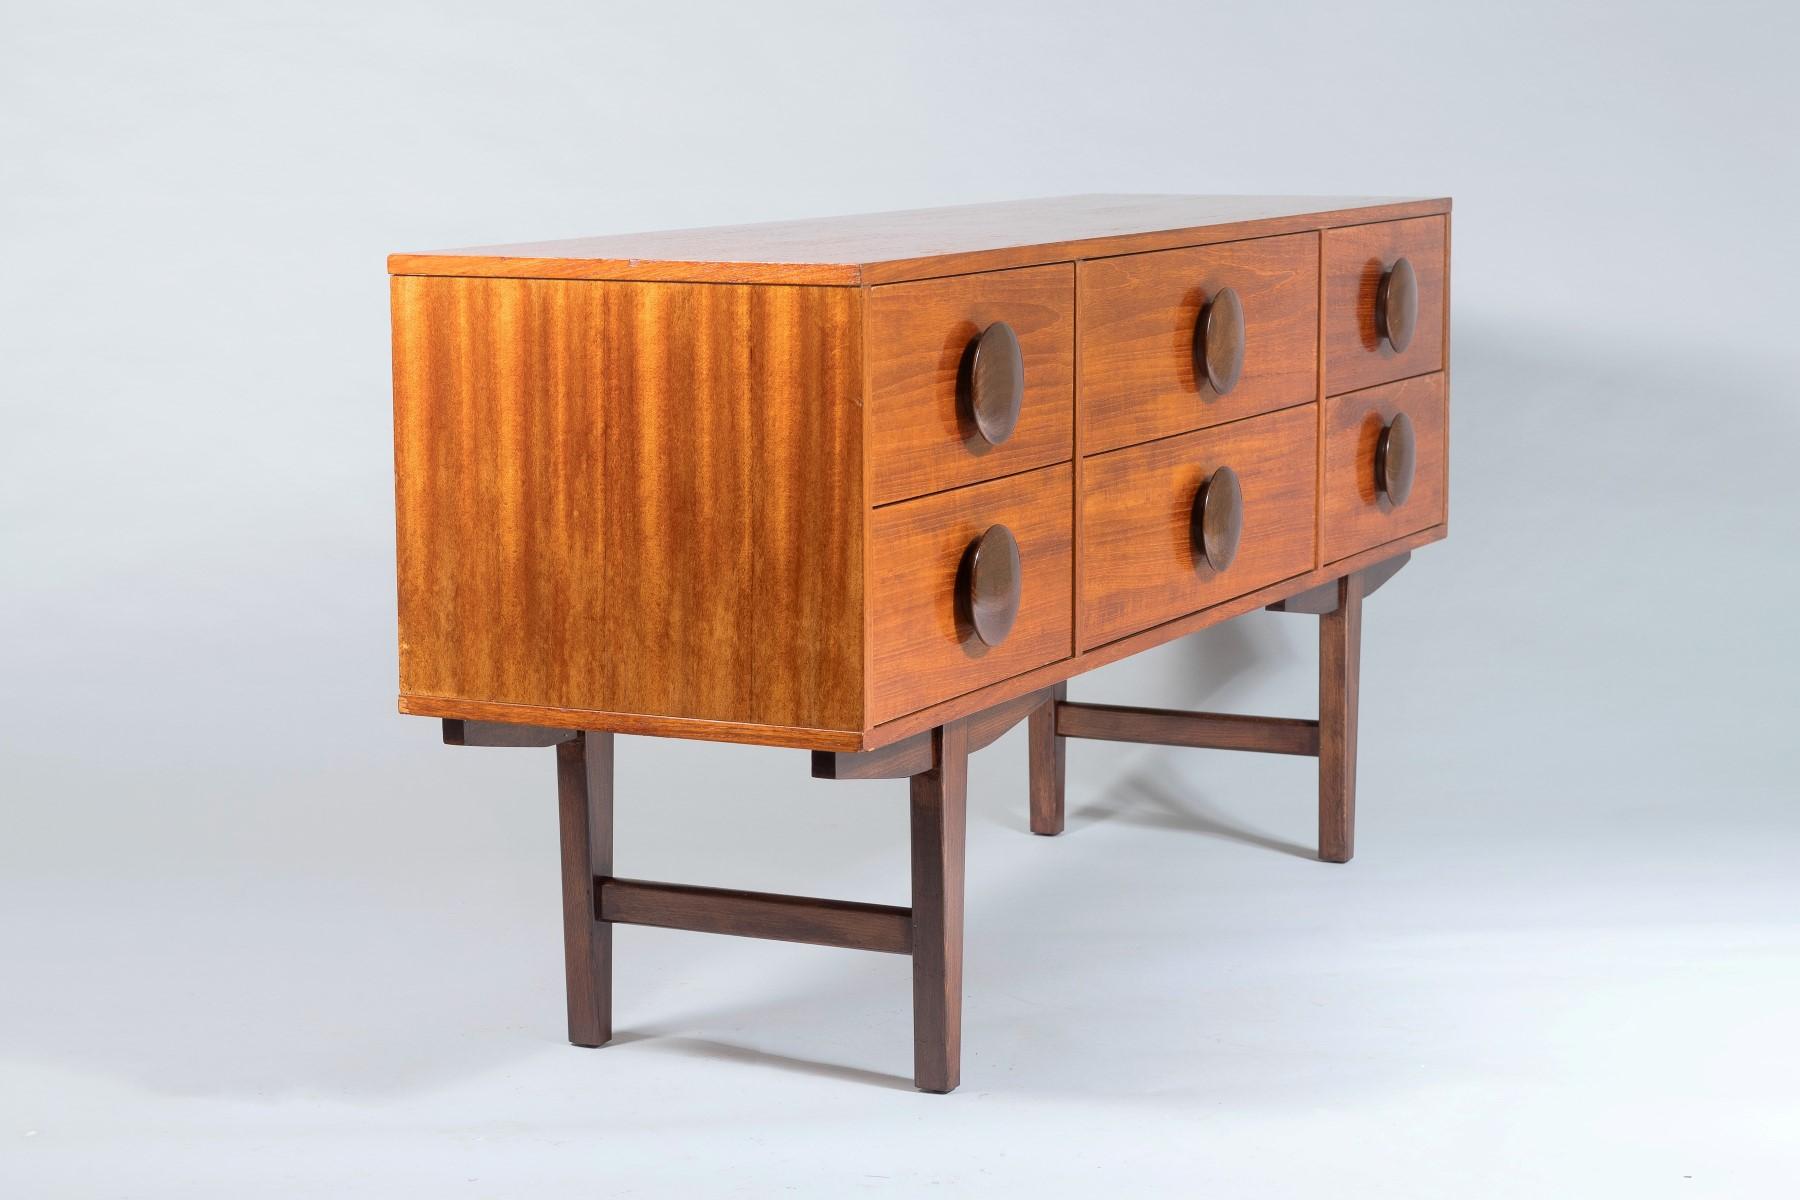 A 1960s Mid Century Button Handled Teak Sideboard  6 drawer Credenza For Sale 2